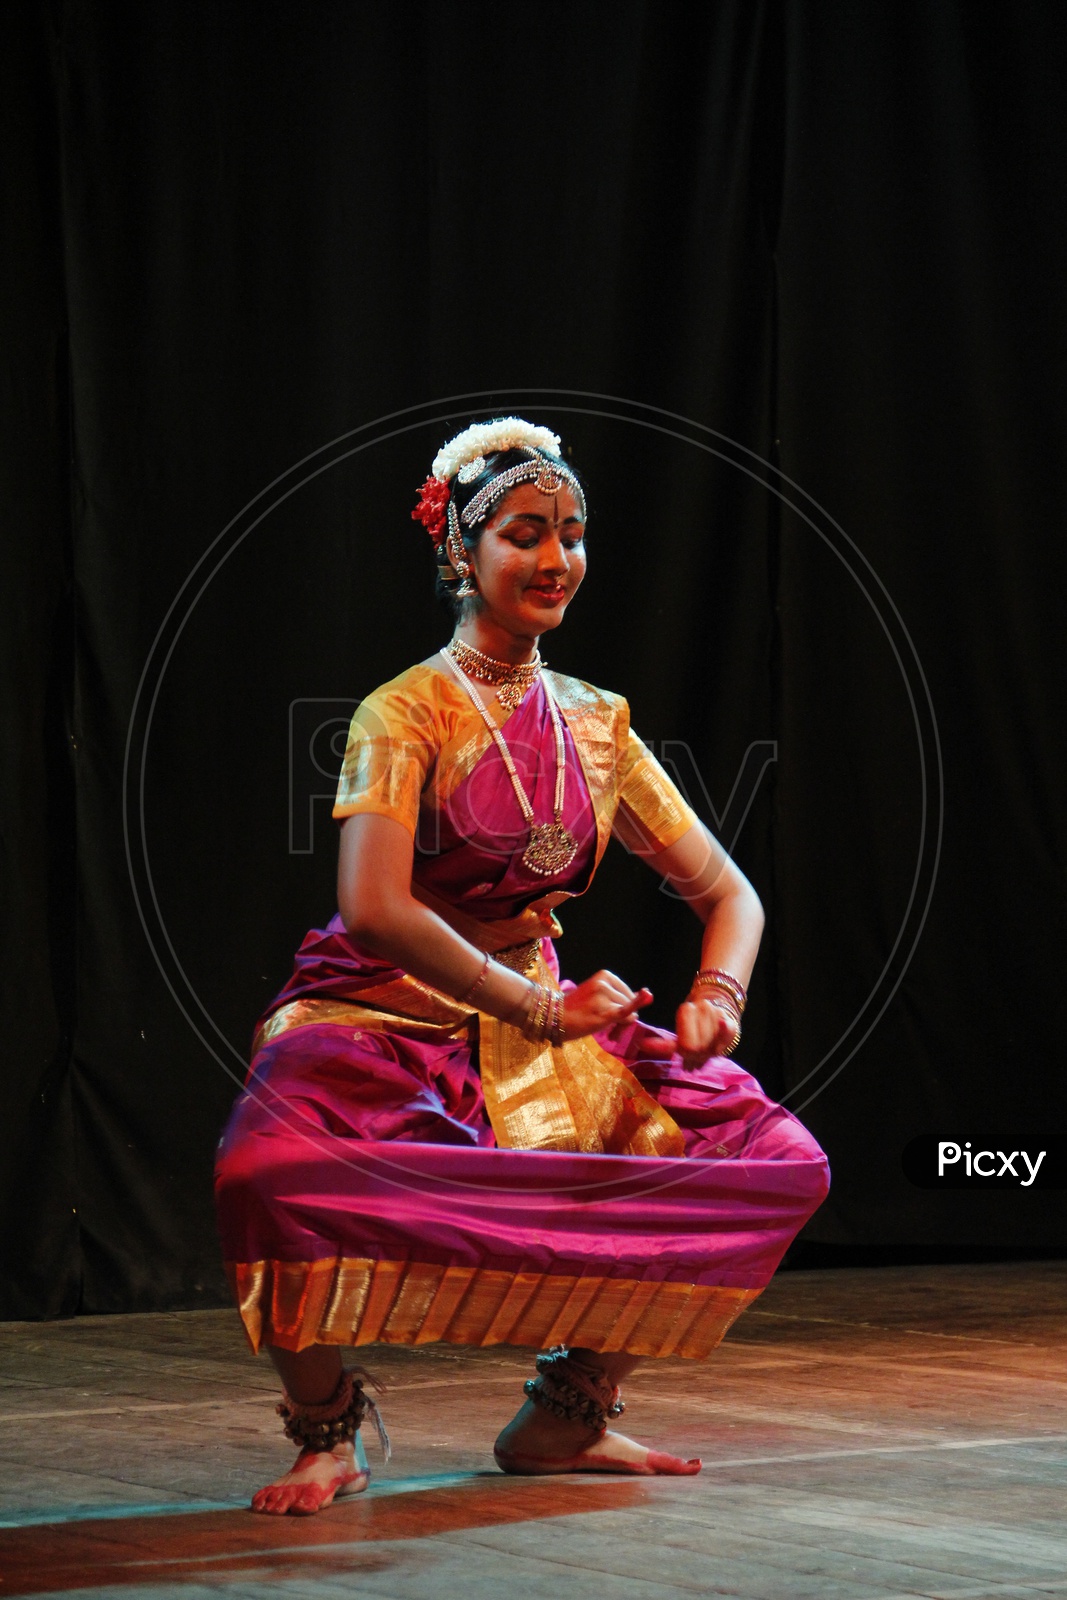 Classical Dance Poses: Over 72,773 Royalty-Free Licensable Stock Photos |  Shutterstock